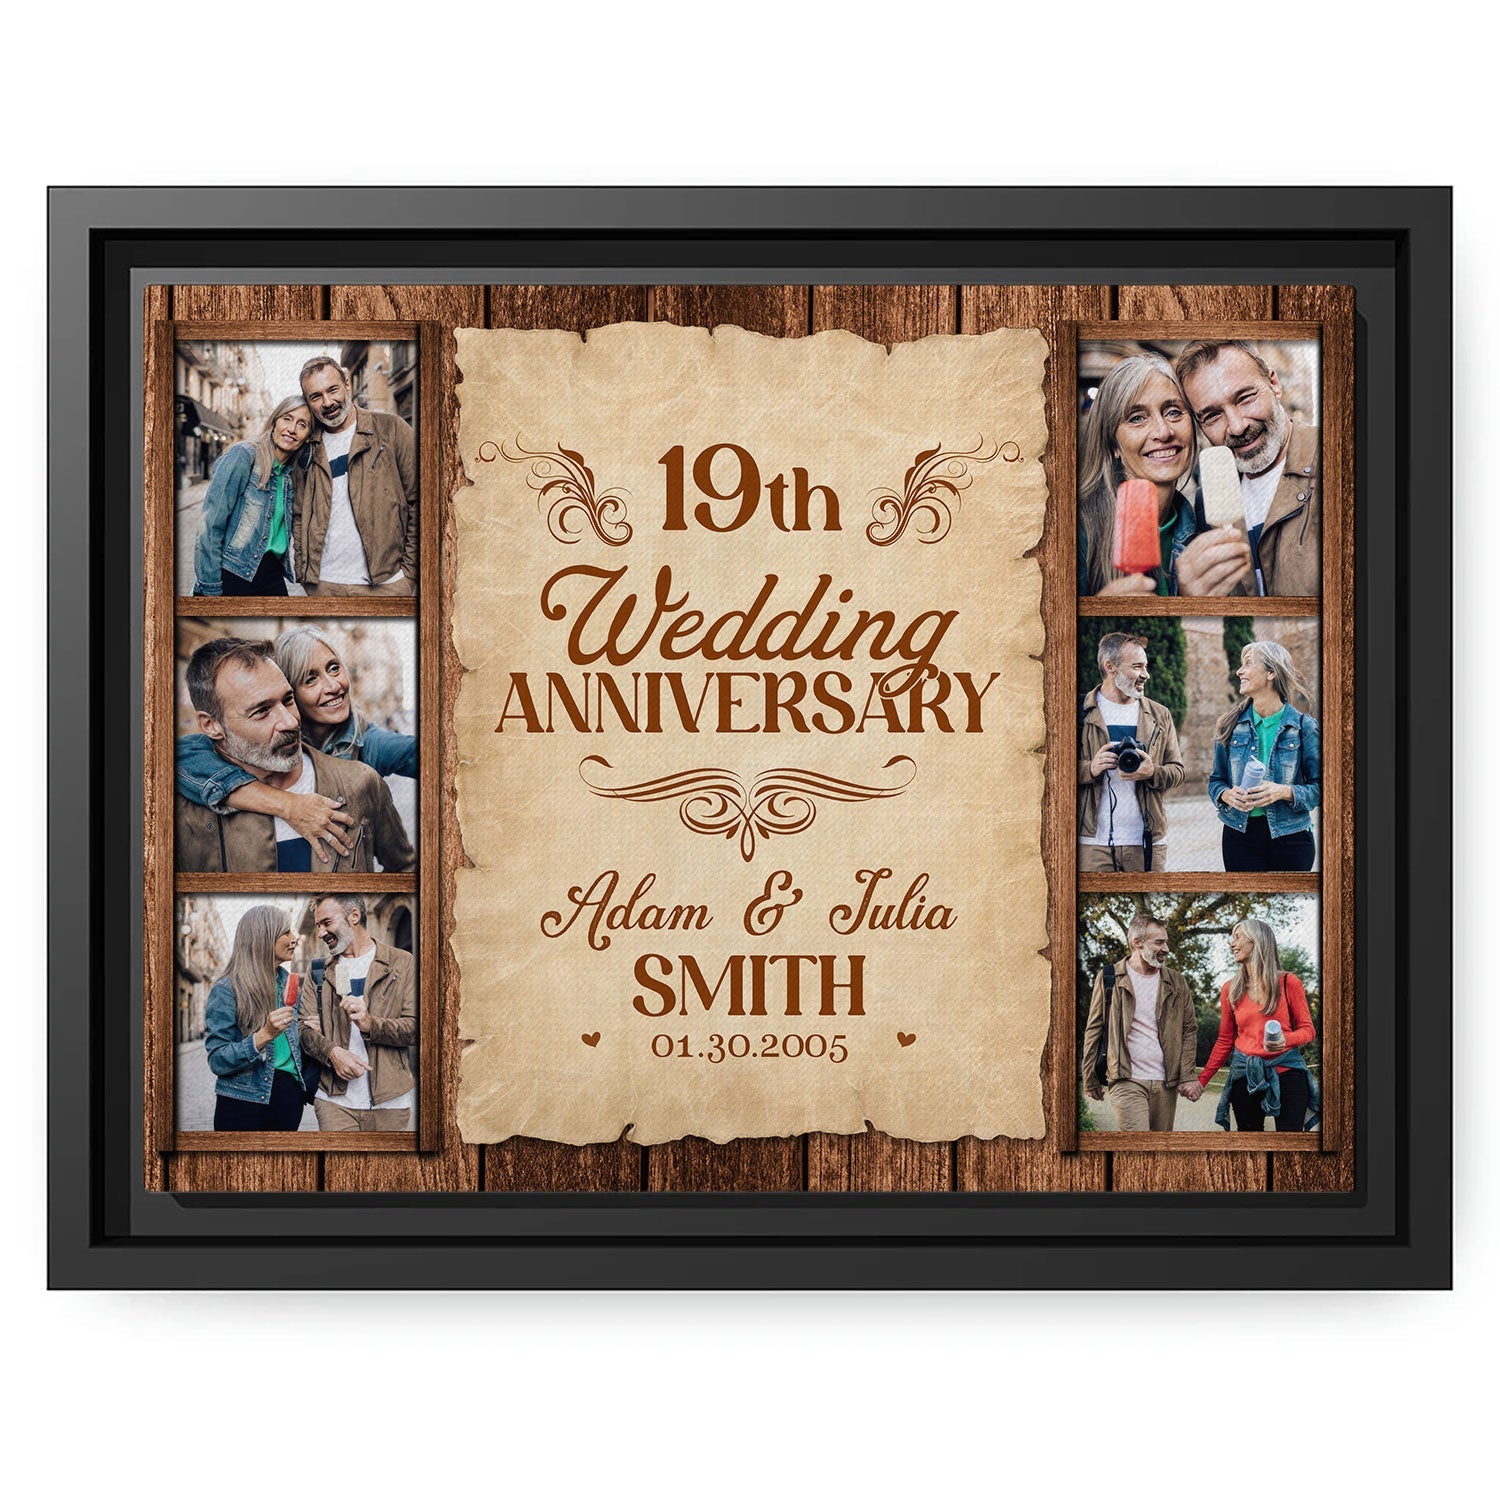 19th Wedding Anniversary - Personalized 19 Year Anniversary gift For Husband or Wife - Custom Canvas Print - MyMindfulGifts